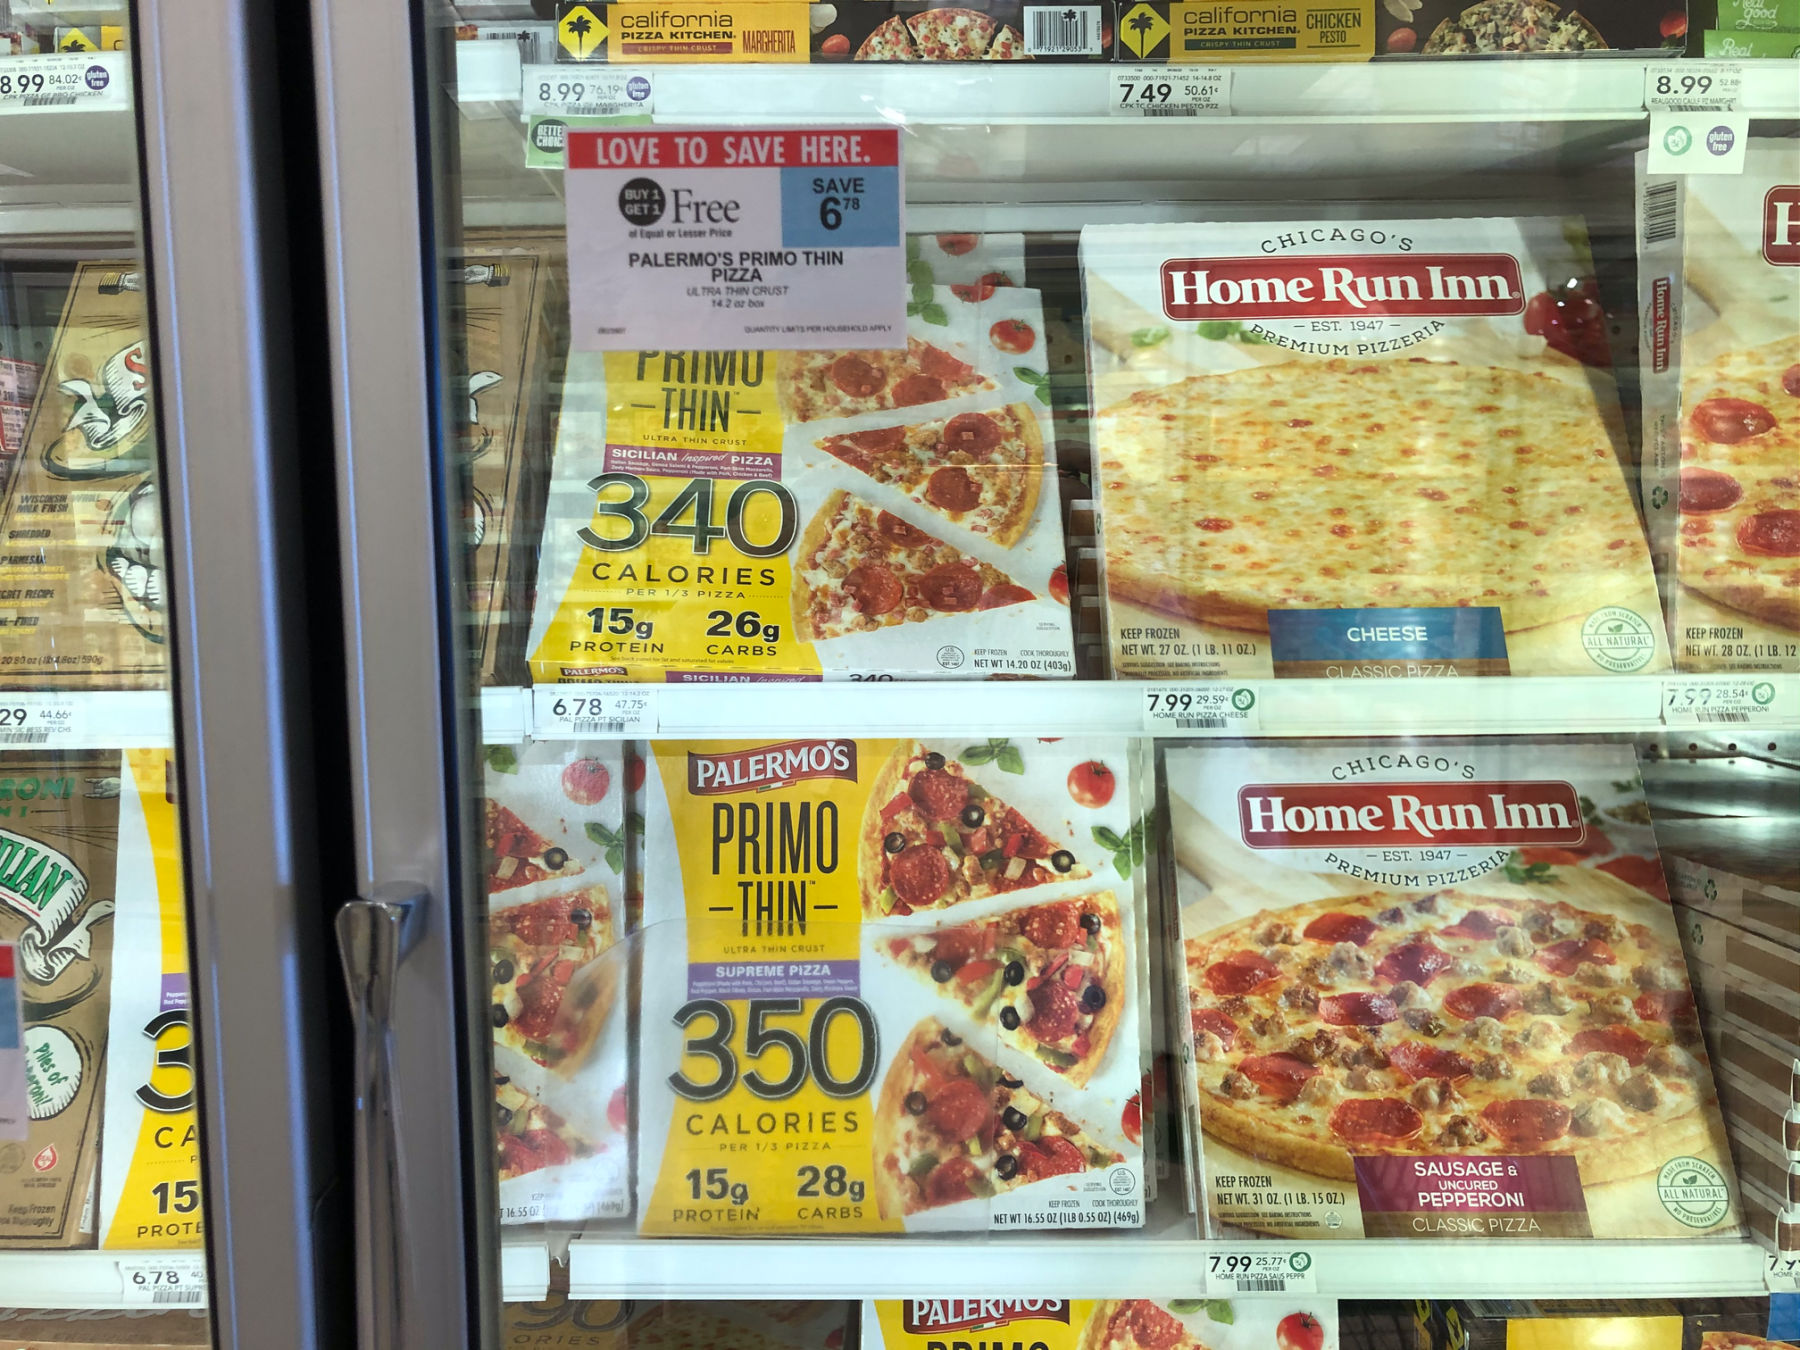 Palermo's Pizza As Low As $2.39 At Publix on I Heart Publix